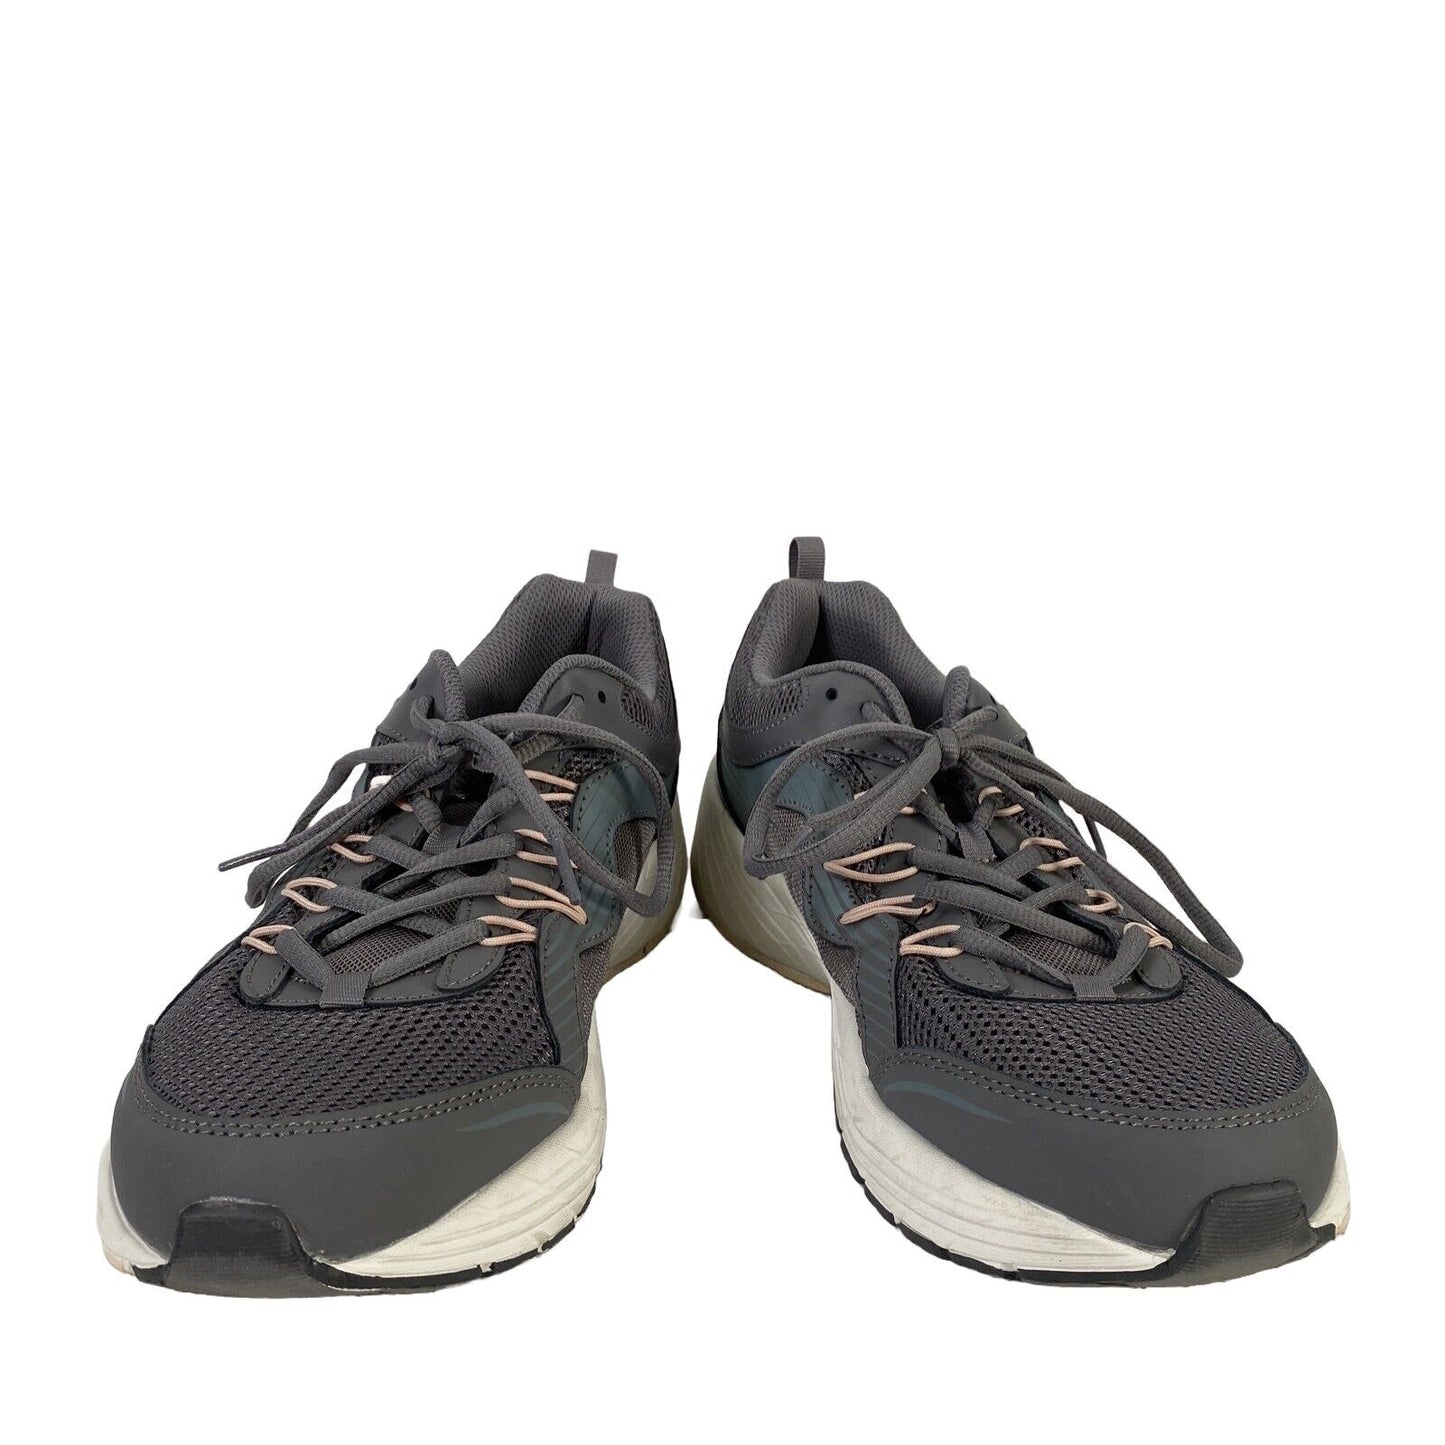 Ryka Women's Gray Intrigue Lace Up Comfort Walking Shoes - 11 Wide